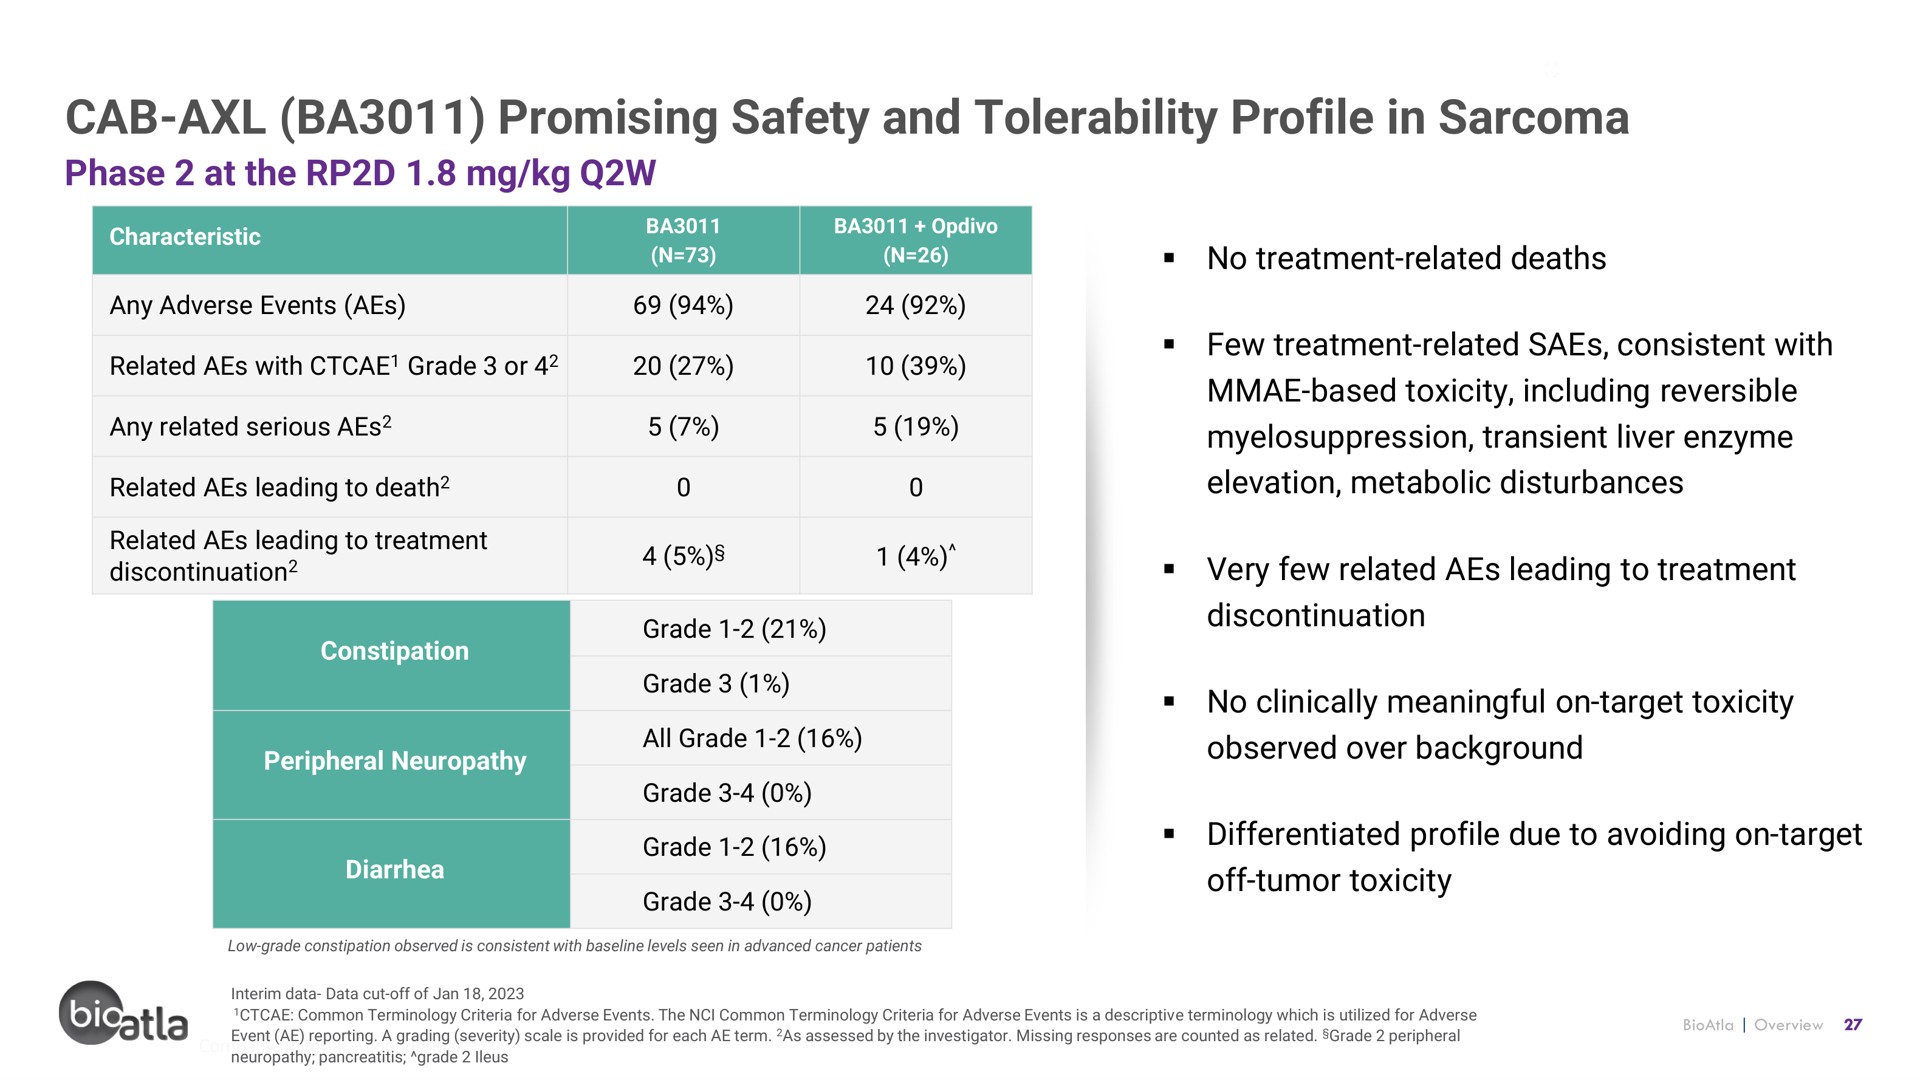 cab promising safety and tolerability profile in sarcoma | BioAtla